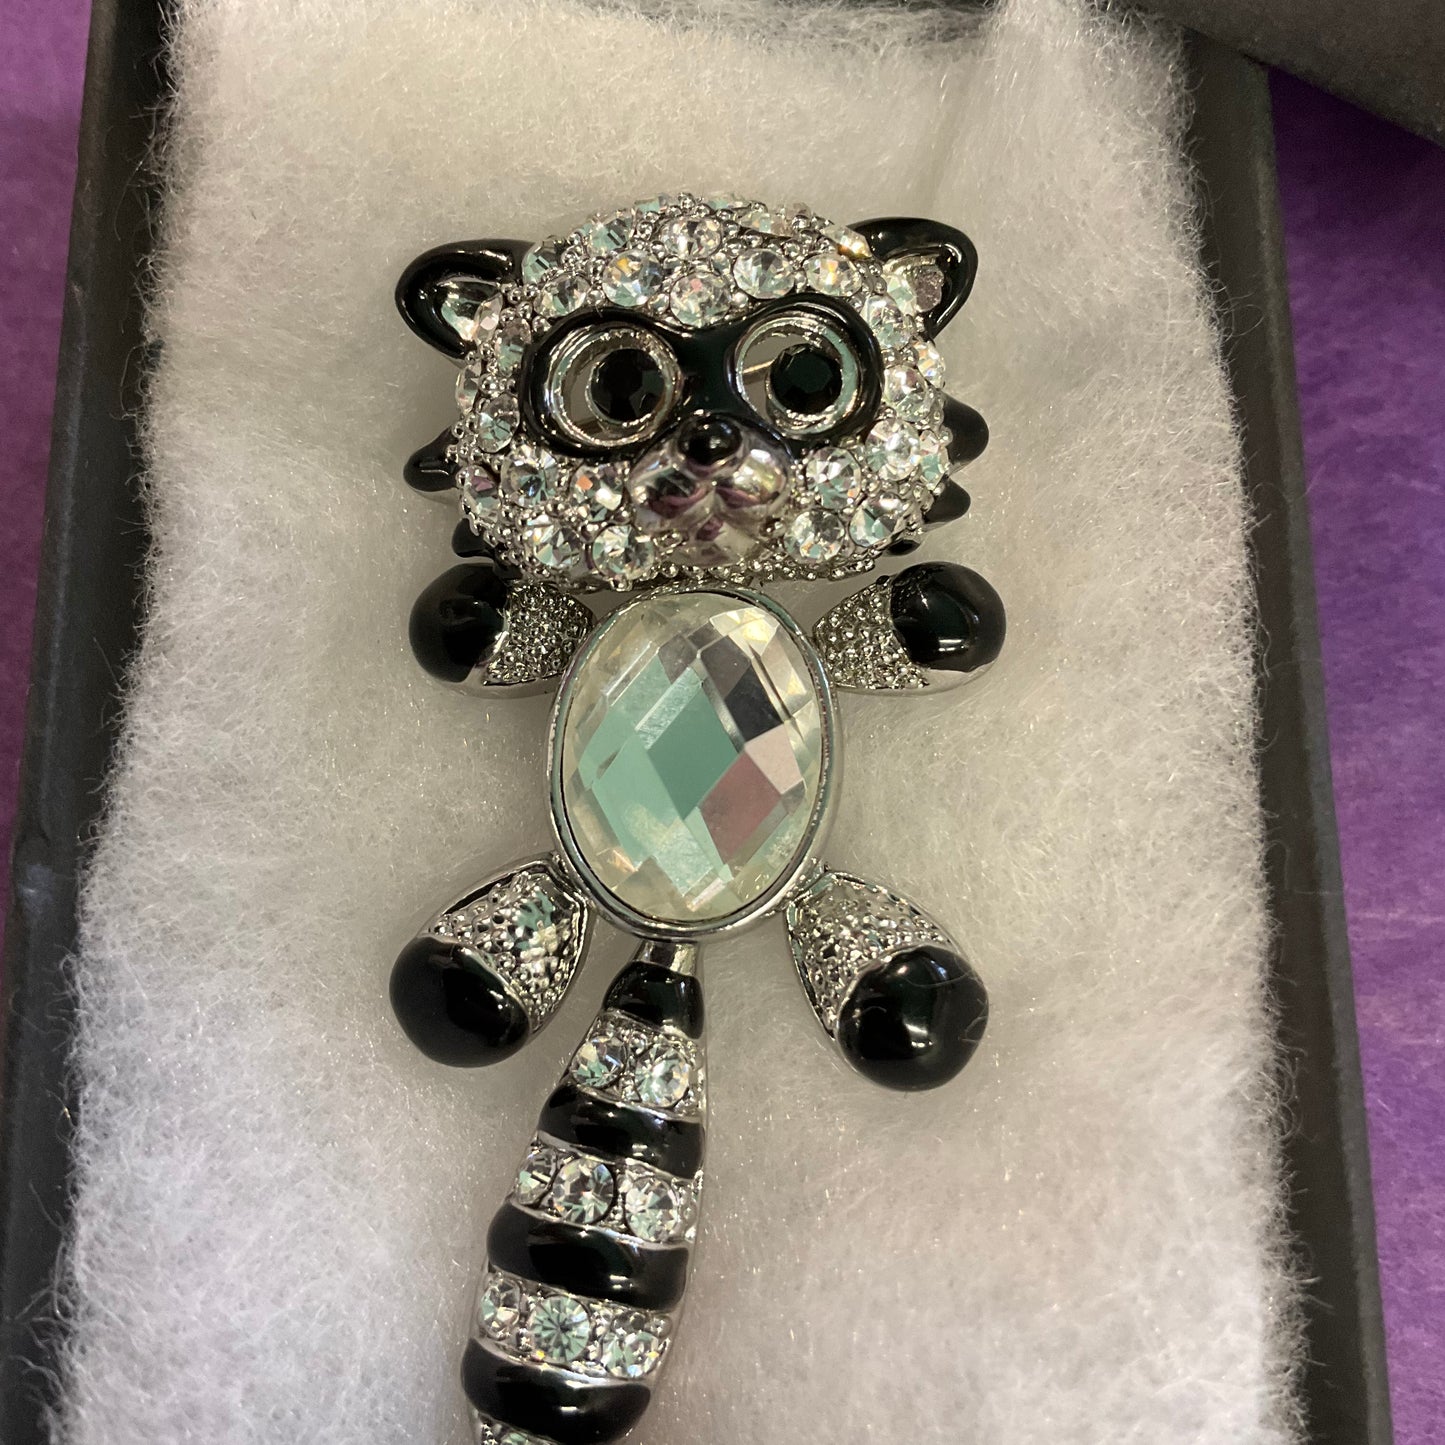 Vintage Butler and Wilson oversized Enamel and Crystal Raccoon Brooch, gift for her.